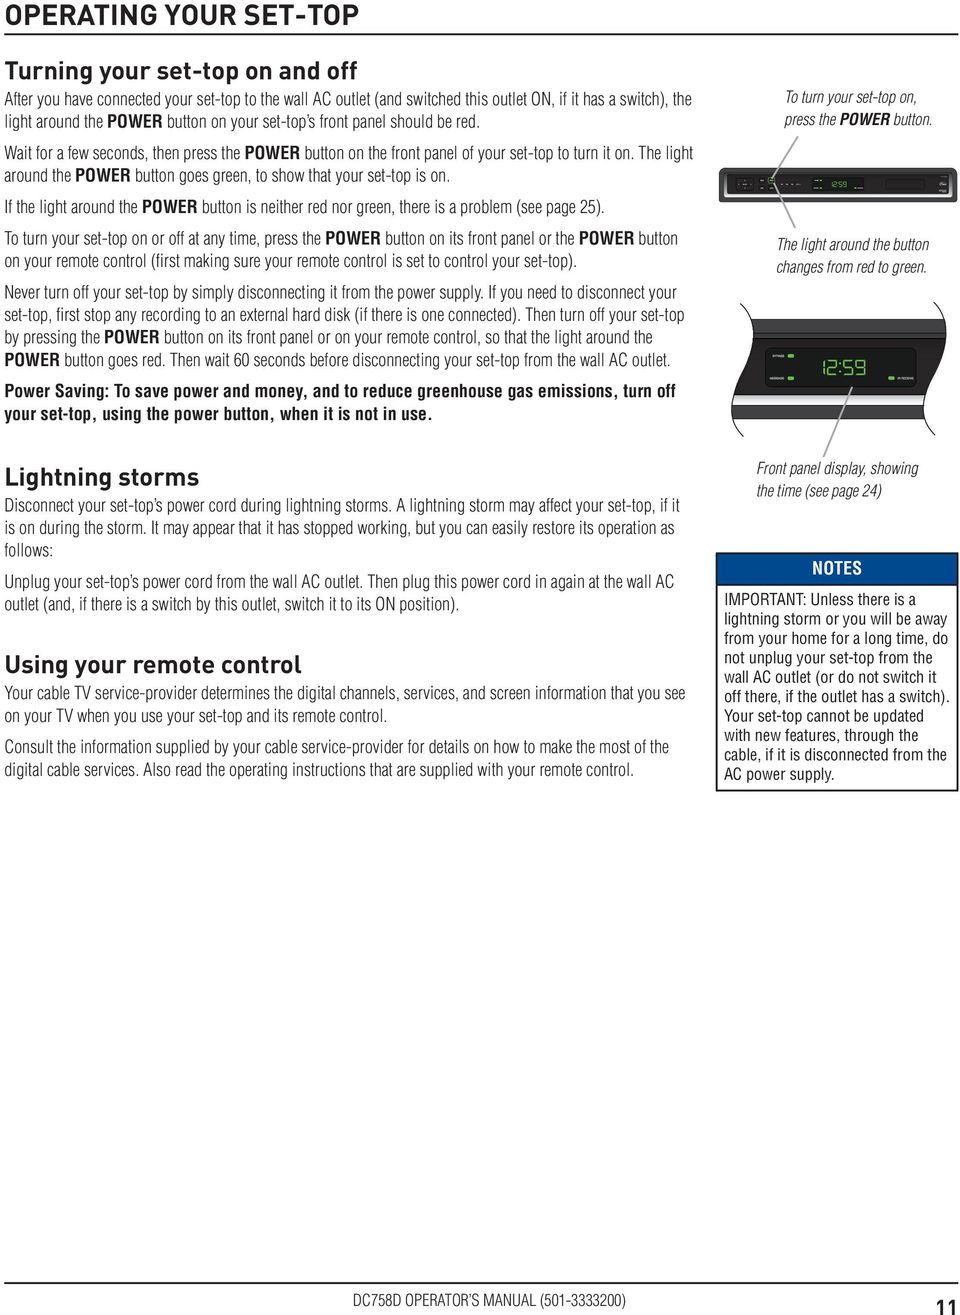 The light around the POWER button goes green, to show that your set-top is on. If the light around the POWER button is neither red nor green, there is a problem (see page 25).